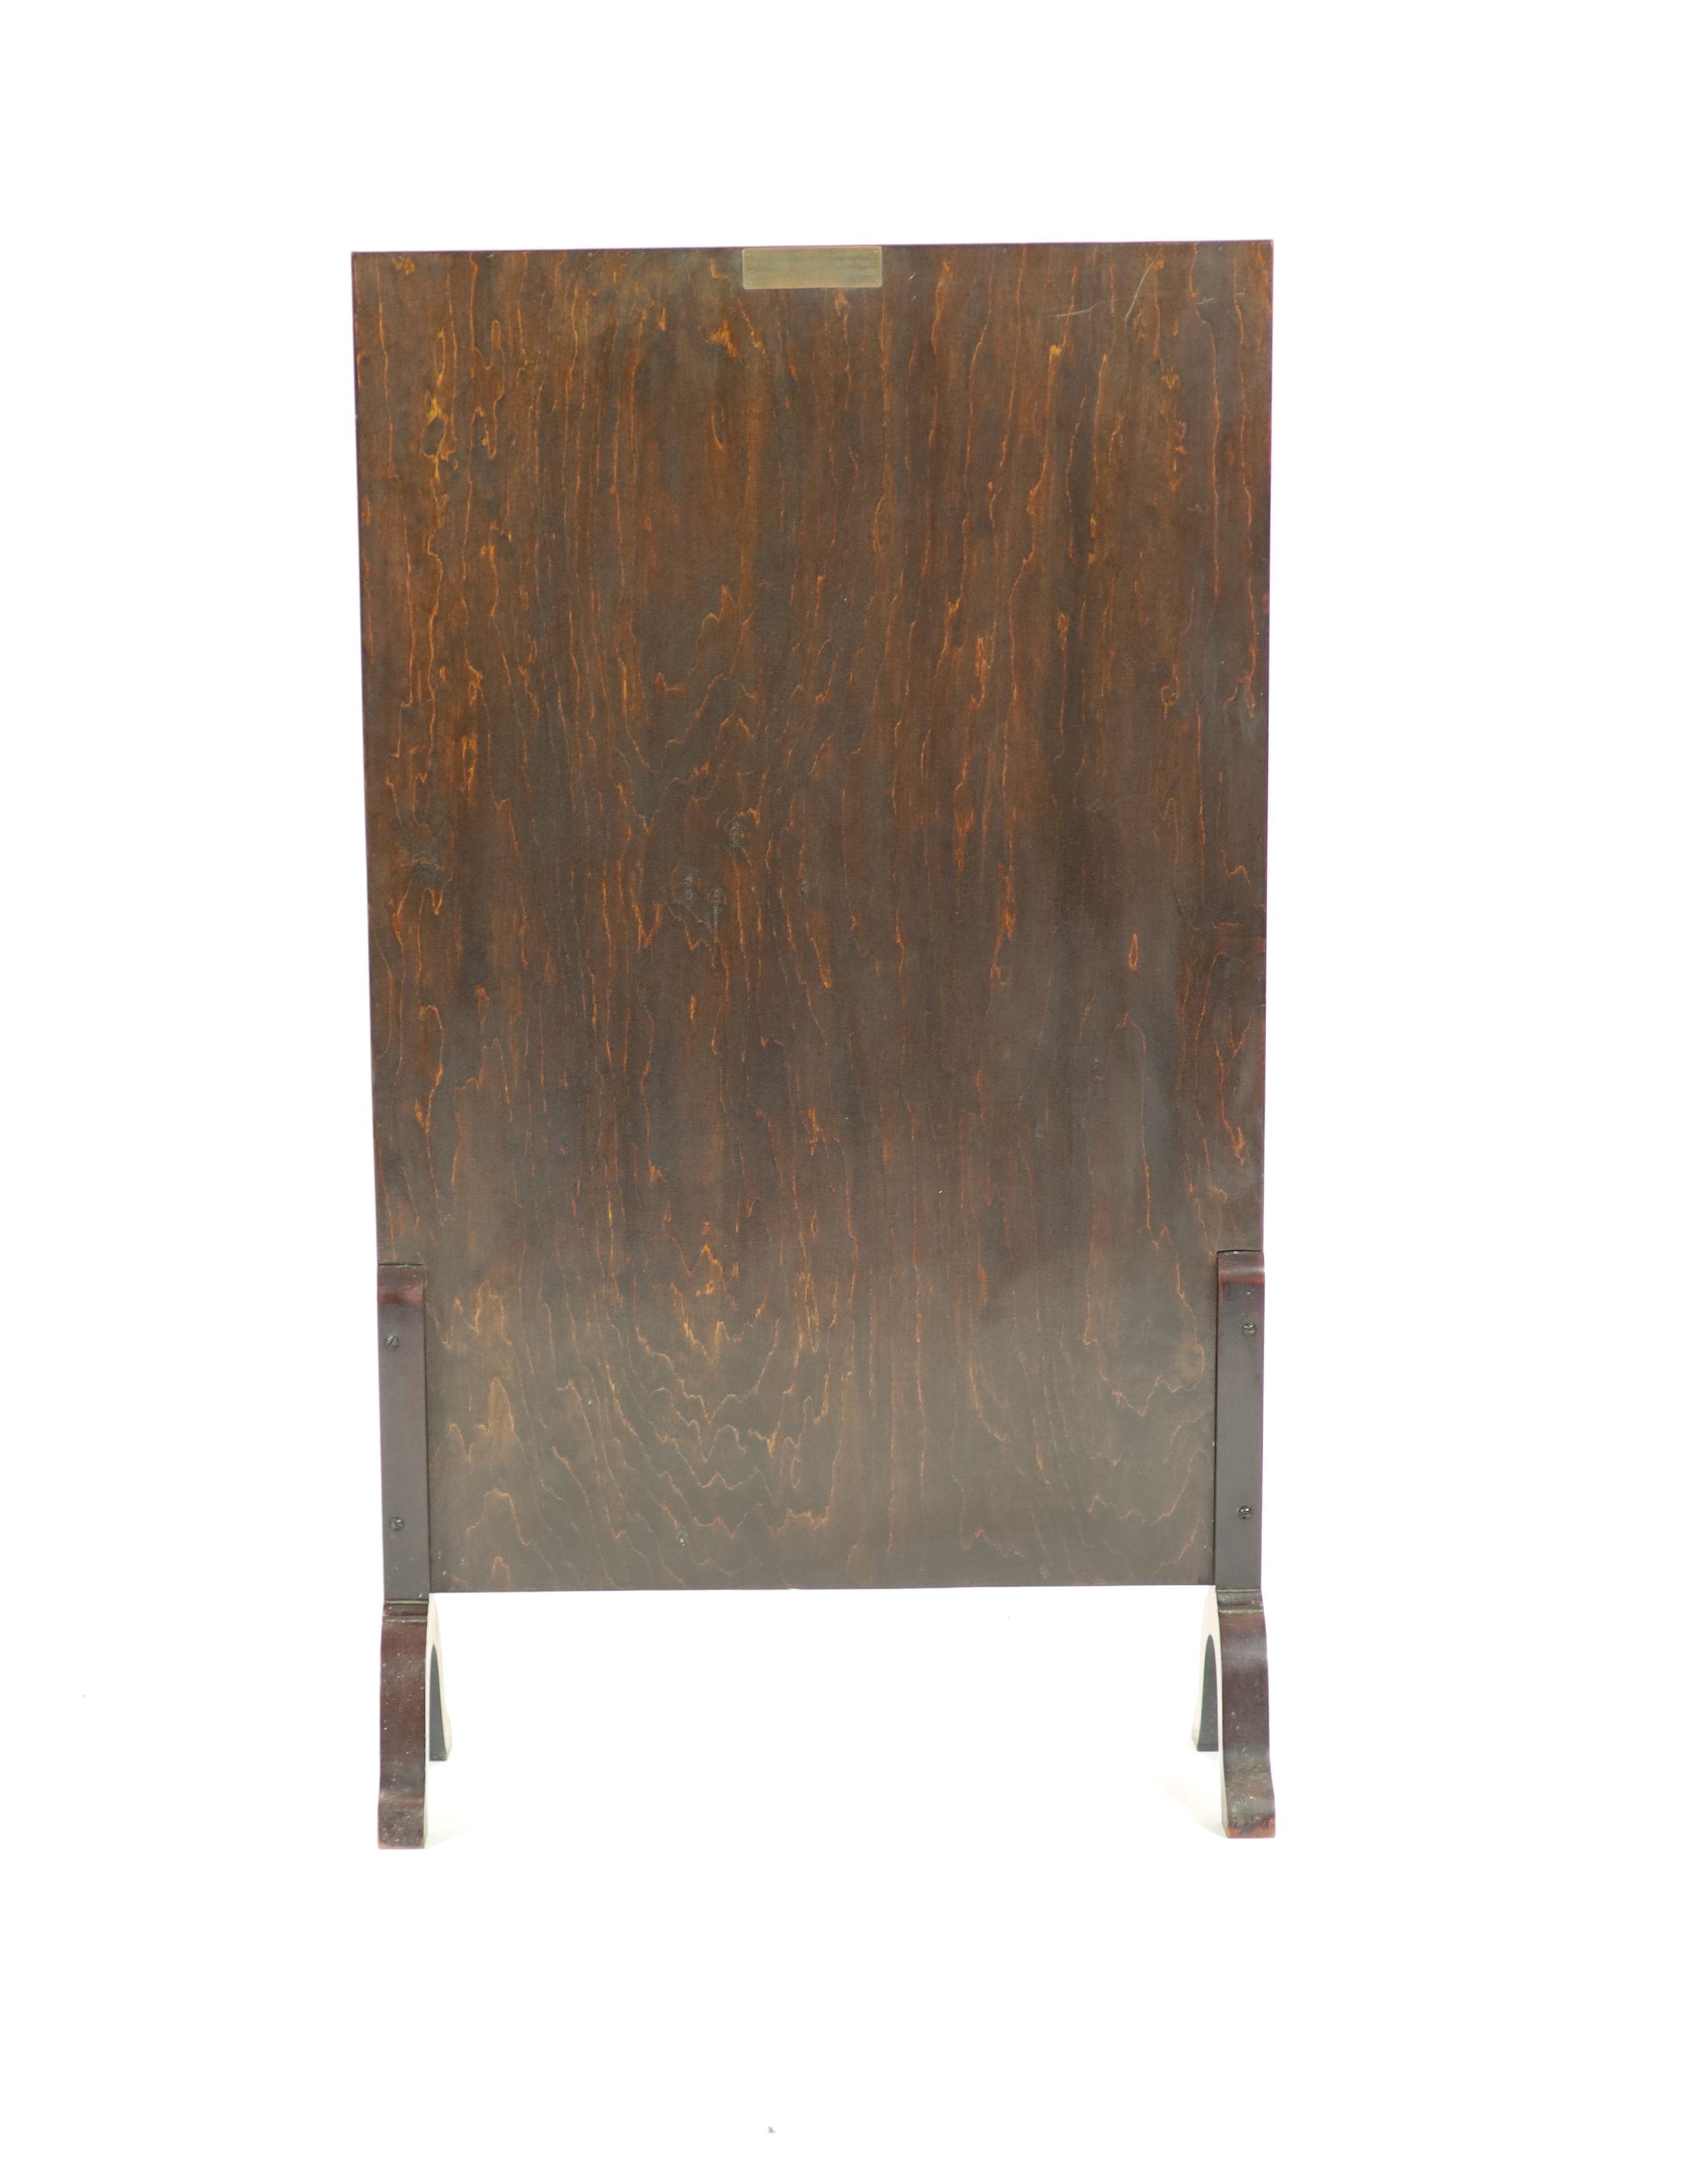 A mahogany cased and glazed embroidered fire screen of Royal interest 108 x 62cm.